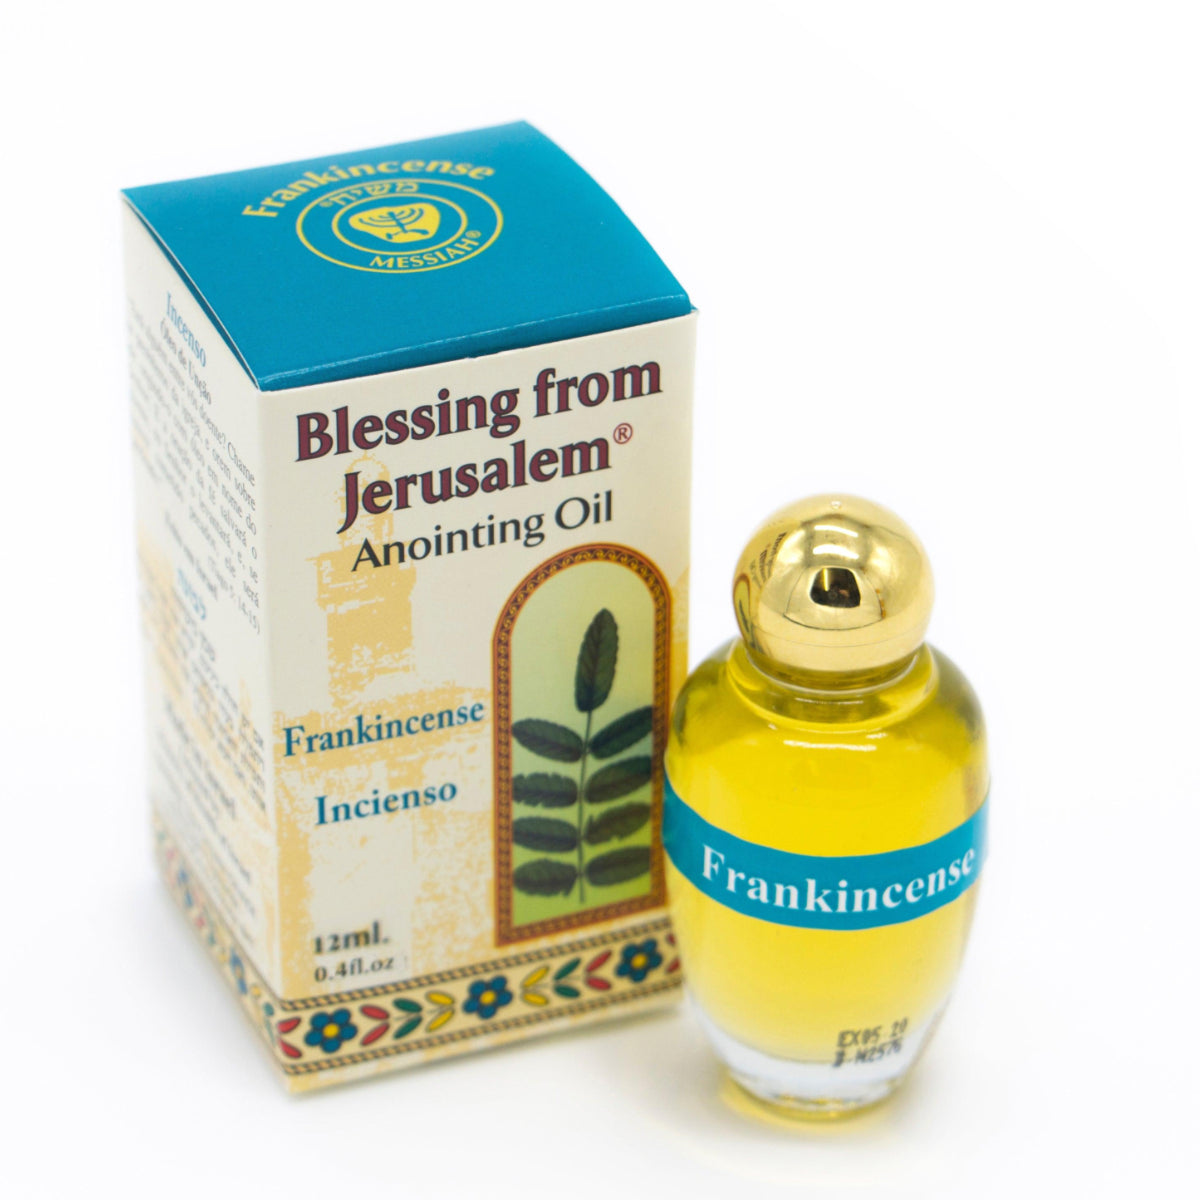 Anointing Oil Frankincense 12 ml -  0.4 fl.oz from Holyland